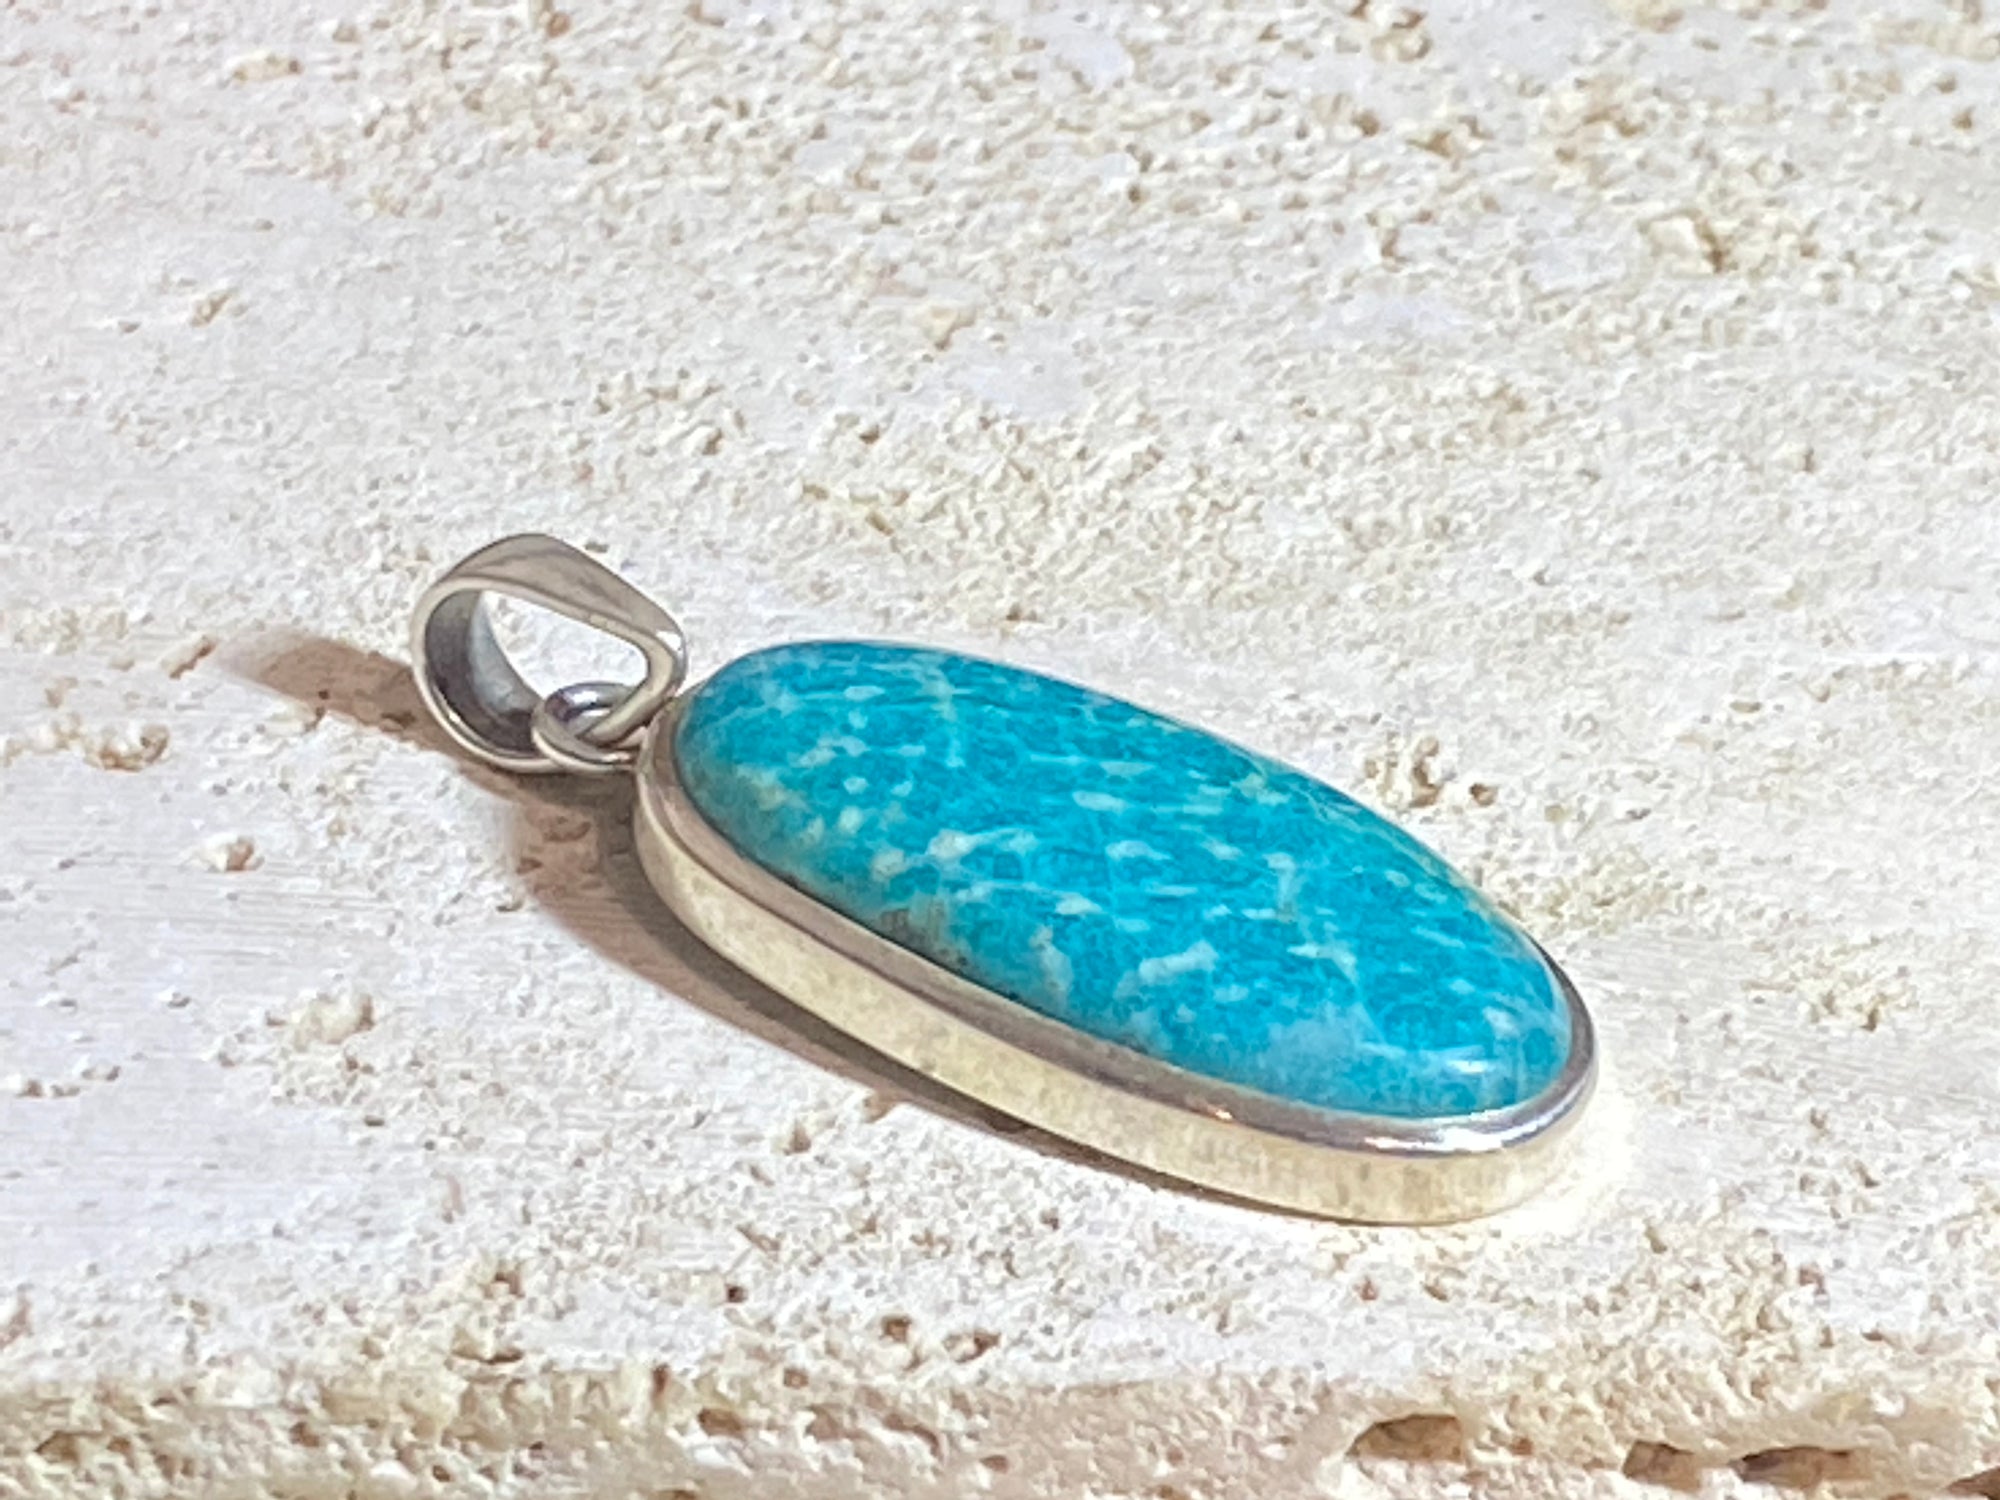 This unusual blue amazonite pendant is set off by a sterling silver bezel, topped by a bail that’s large enough to accommodate a thick chain or cord. A stunning piece of amazonite with a very unusual colour.